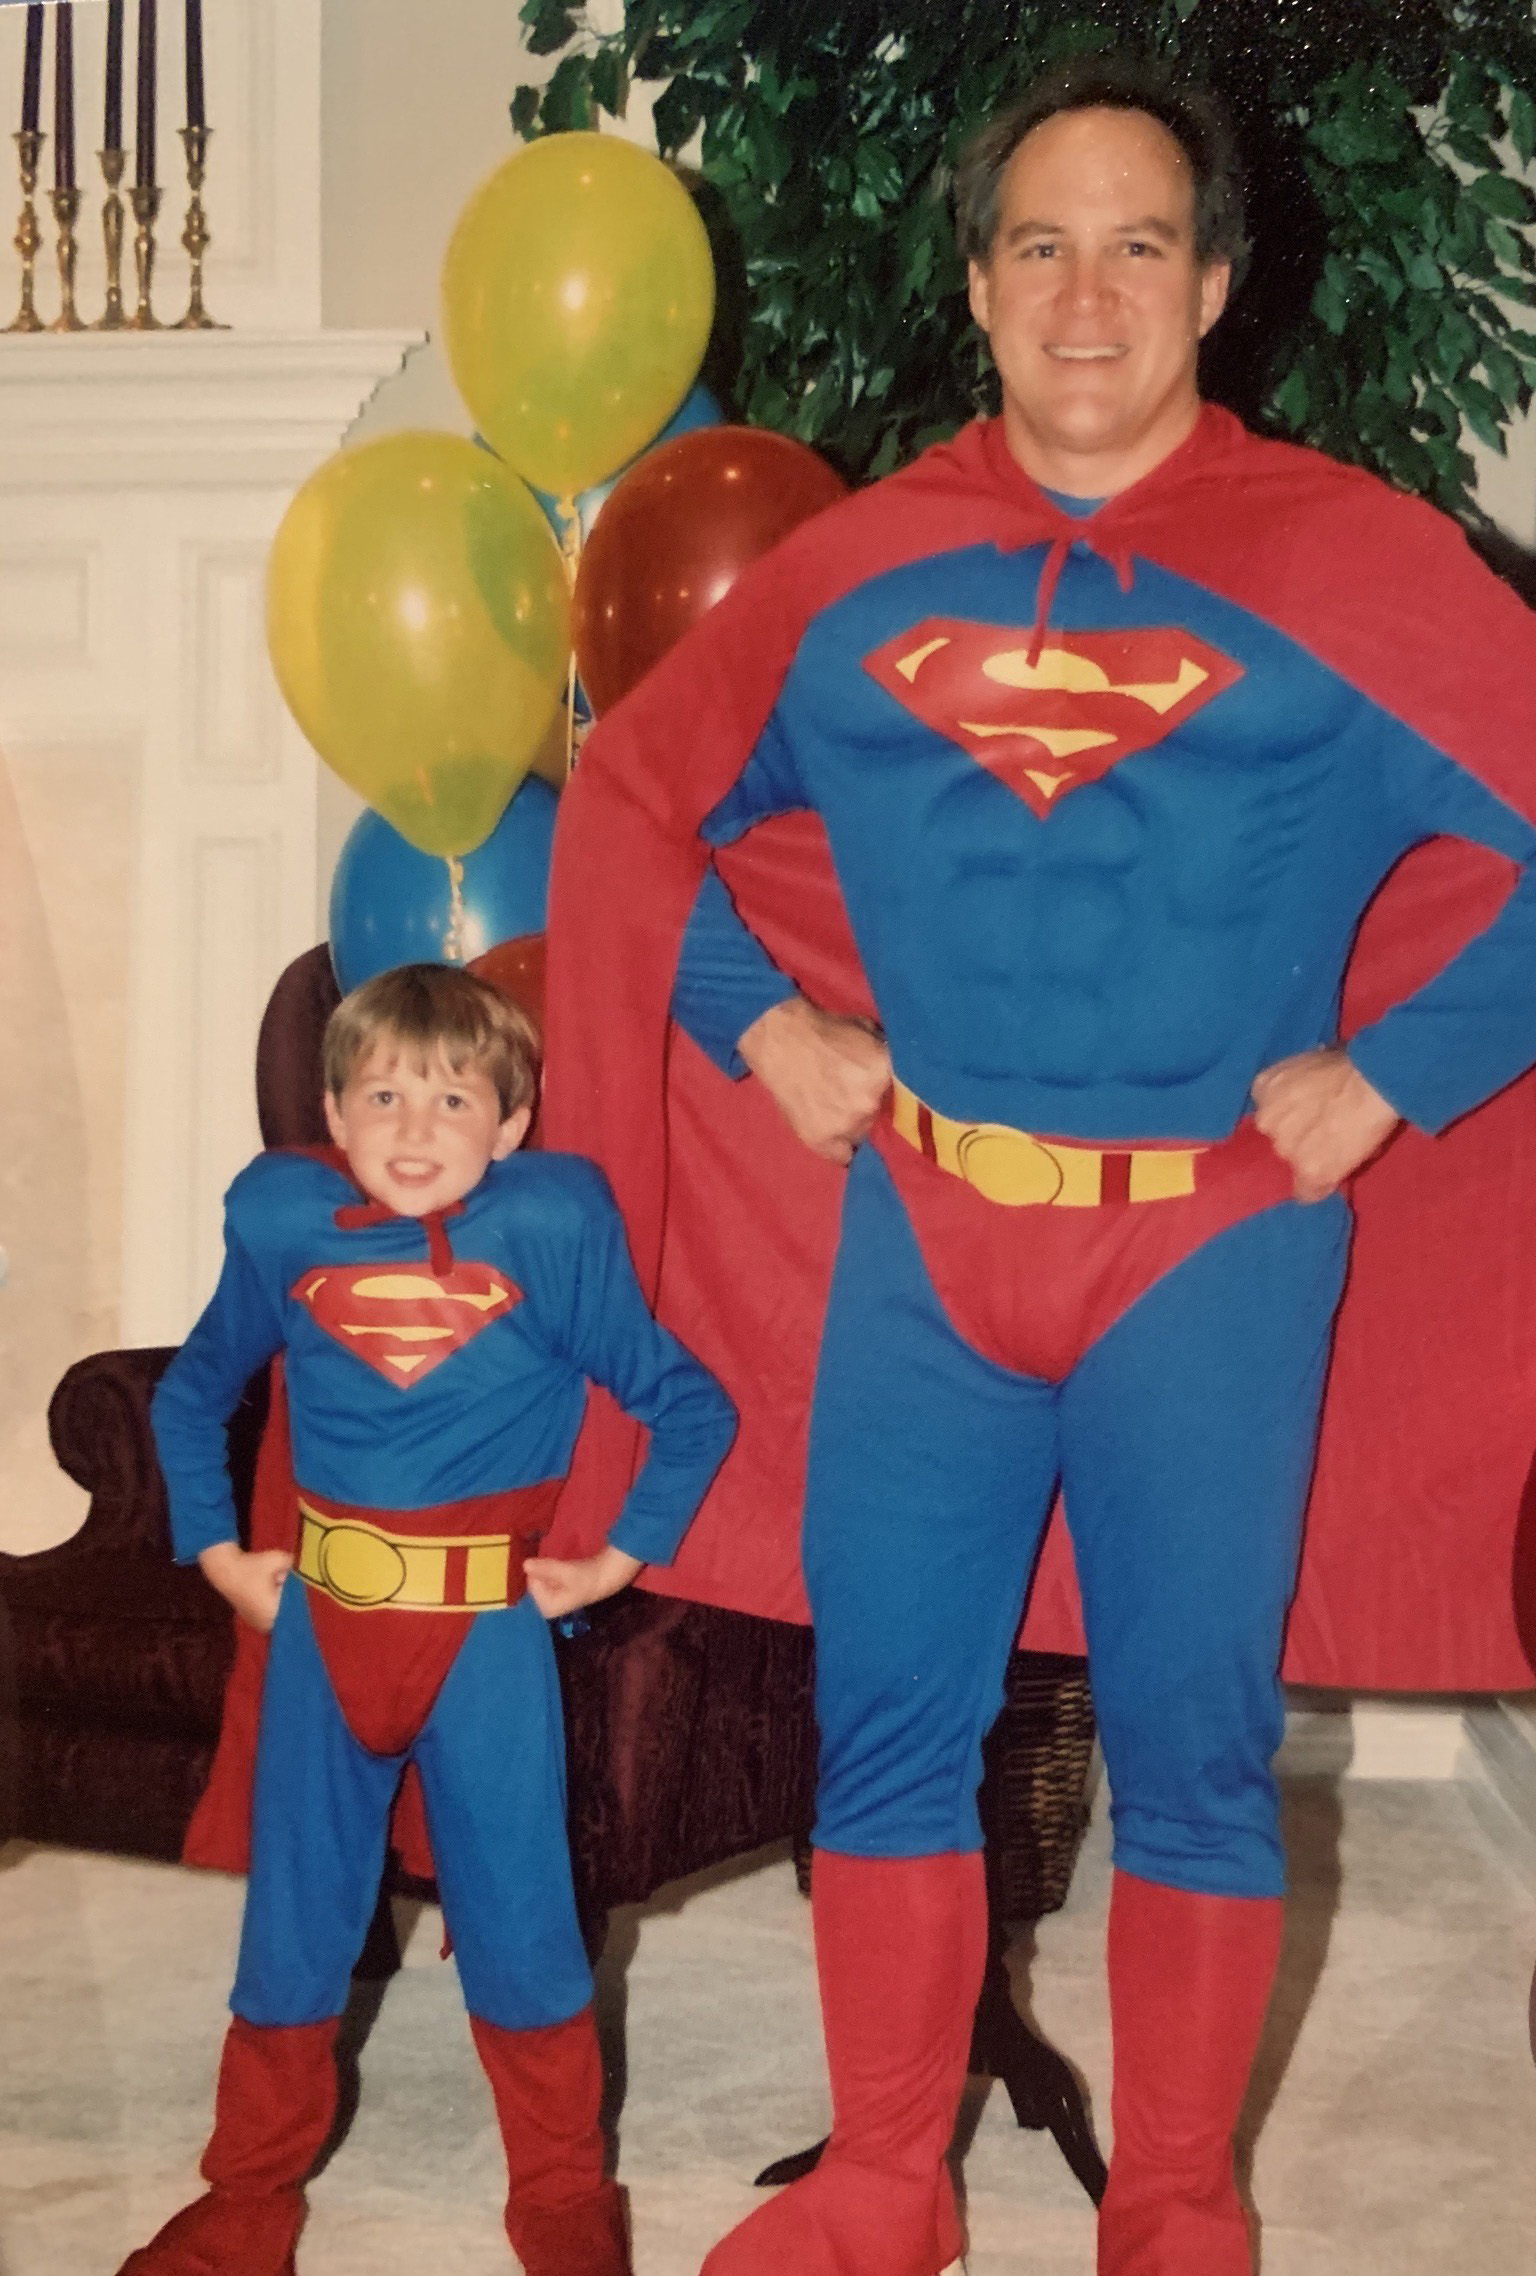 Jonathan Foster and his father, Paul dressed as Superman